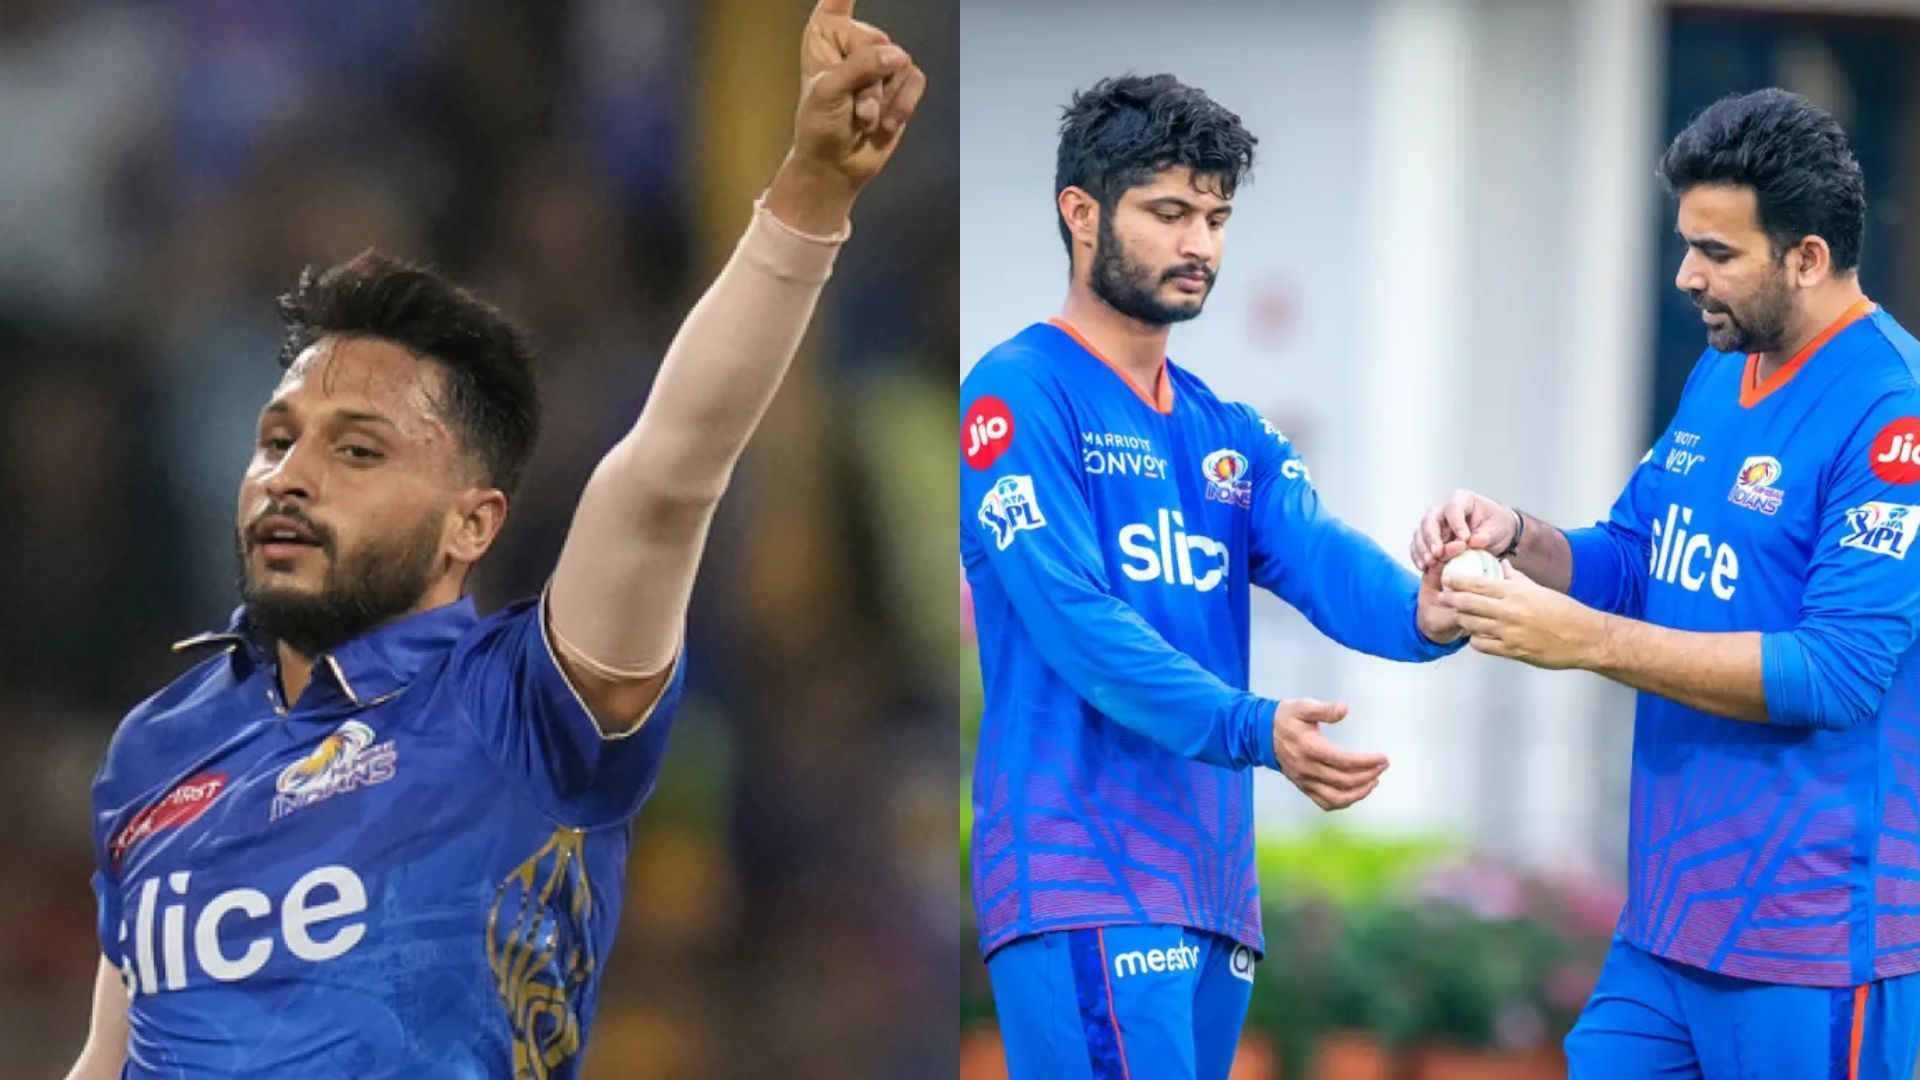 Akash Madhwal (L) and Arshad Khan have been some fresh faces that got an opportunity for MI (P.C.:Twitter)